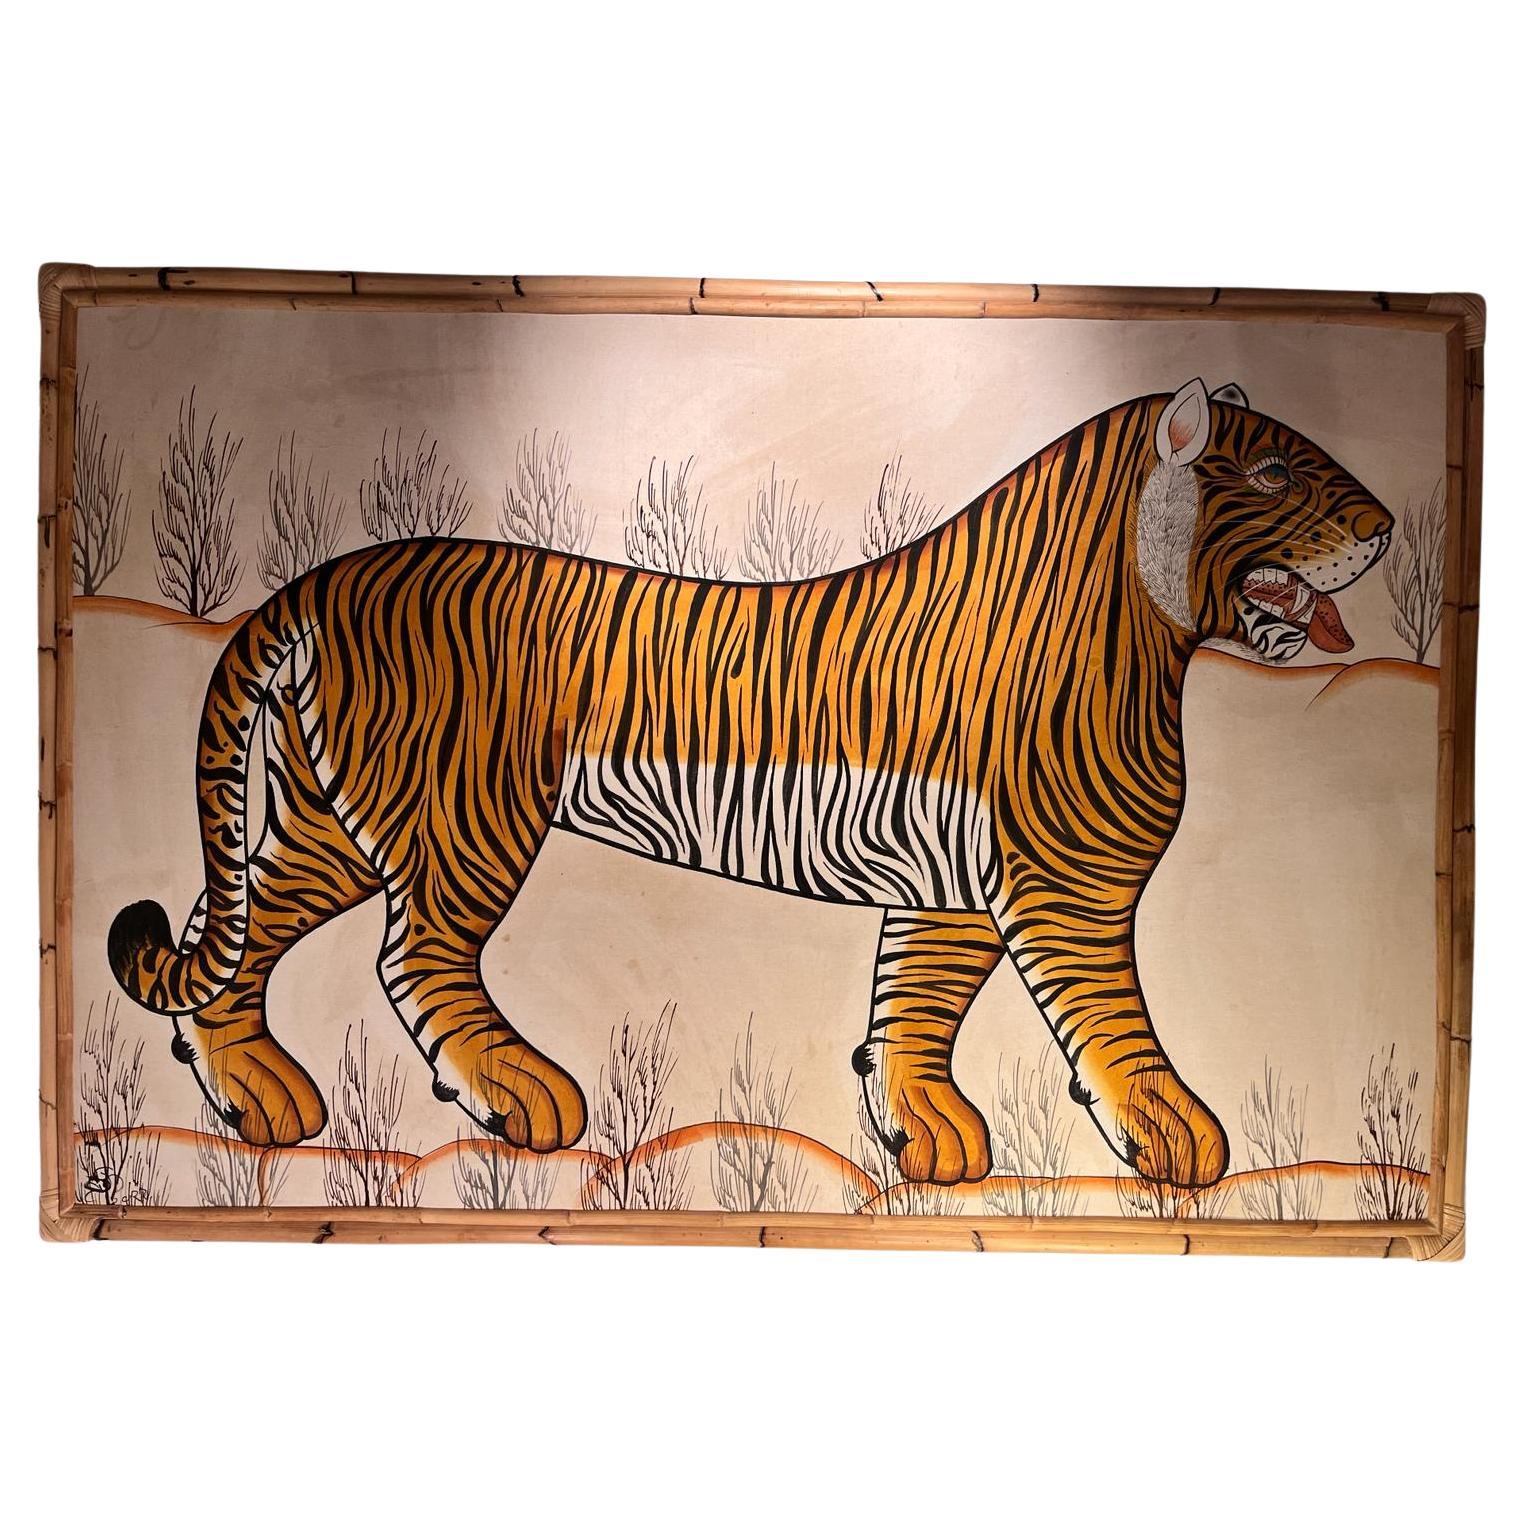 Oil on canva tiger by Jaime Parladé  For Sale